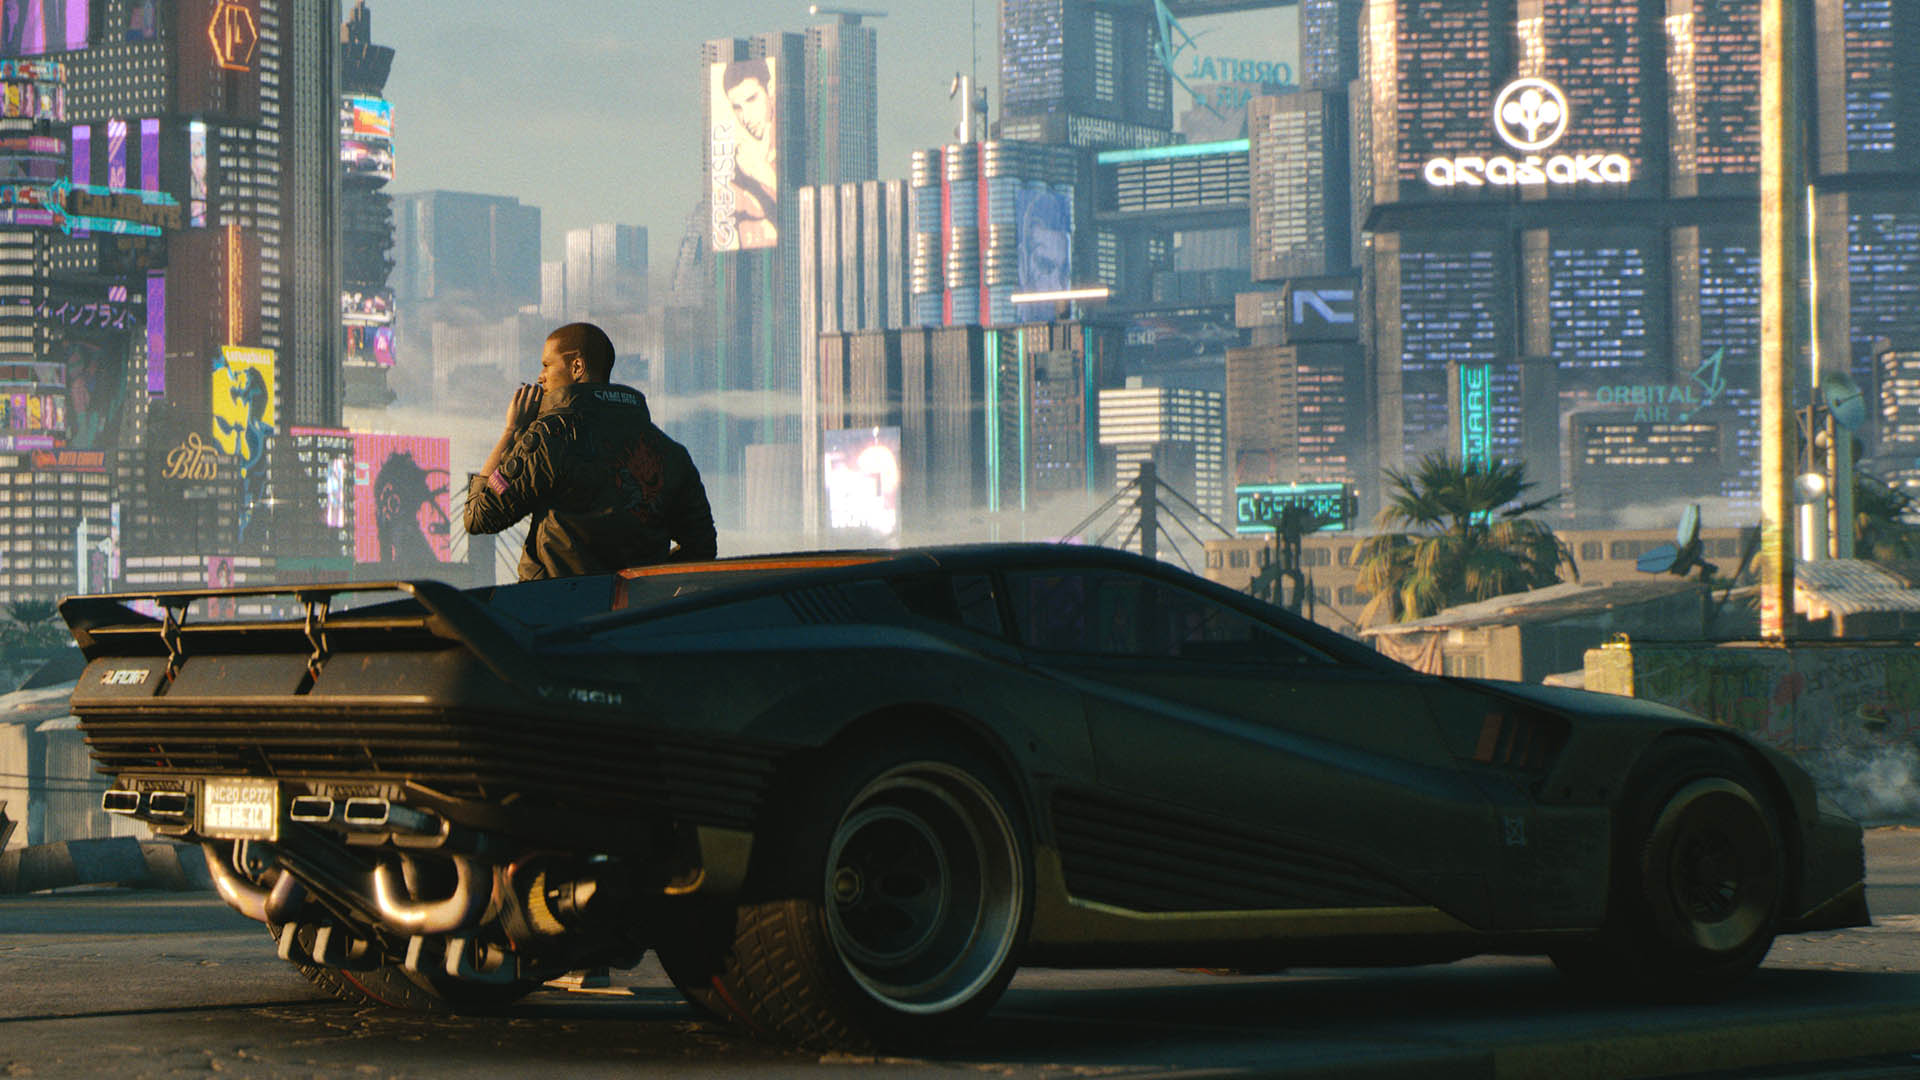 Cyberpunk 2077 Review - An Irresistible World to Explore 13